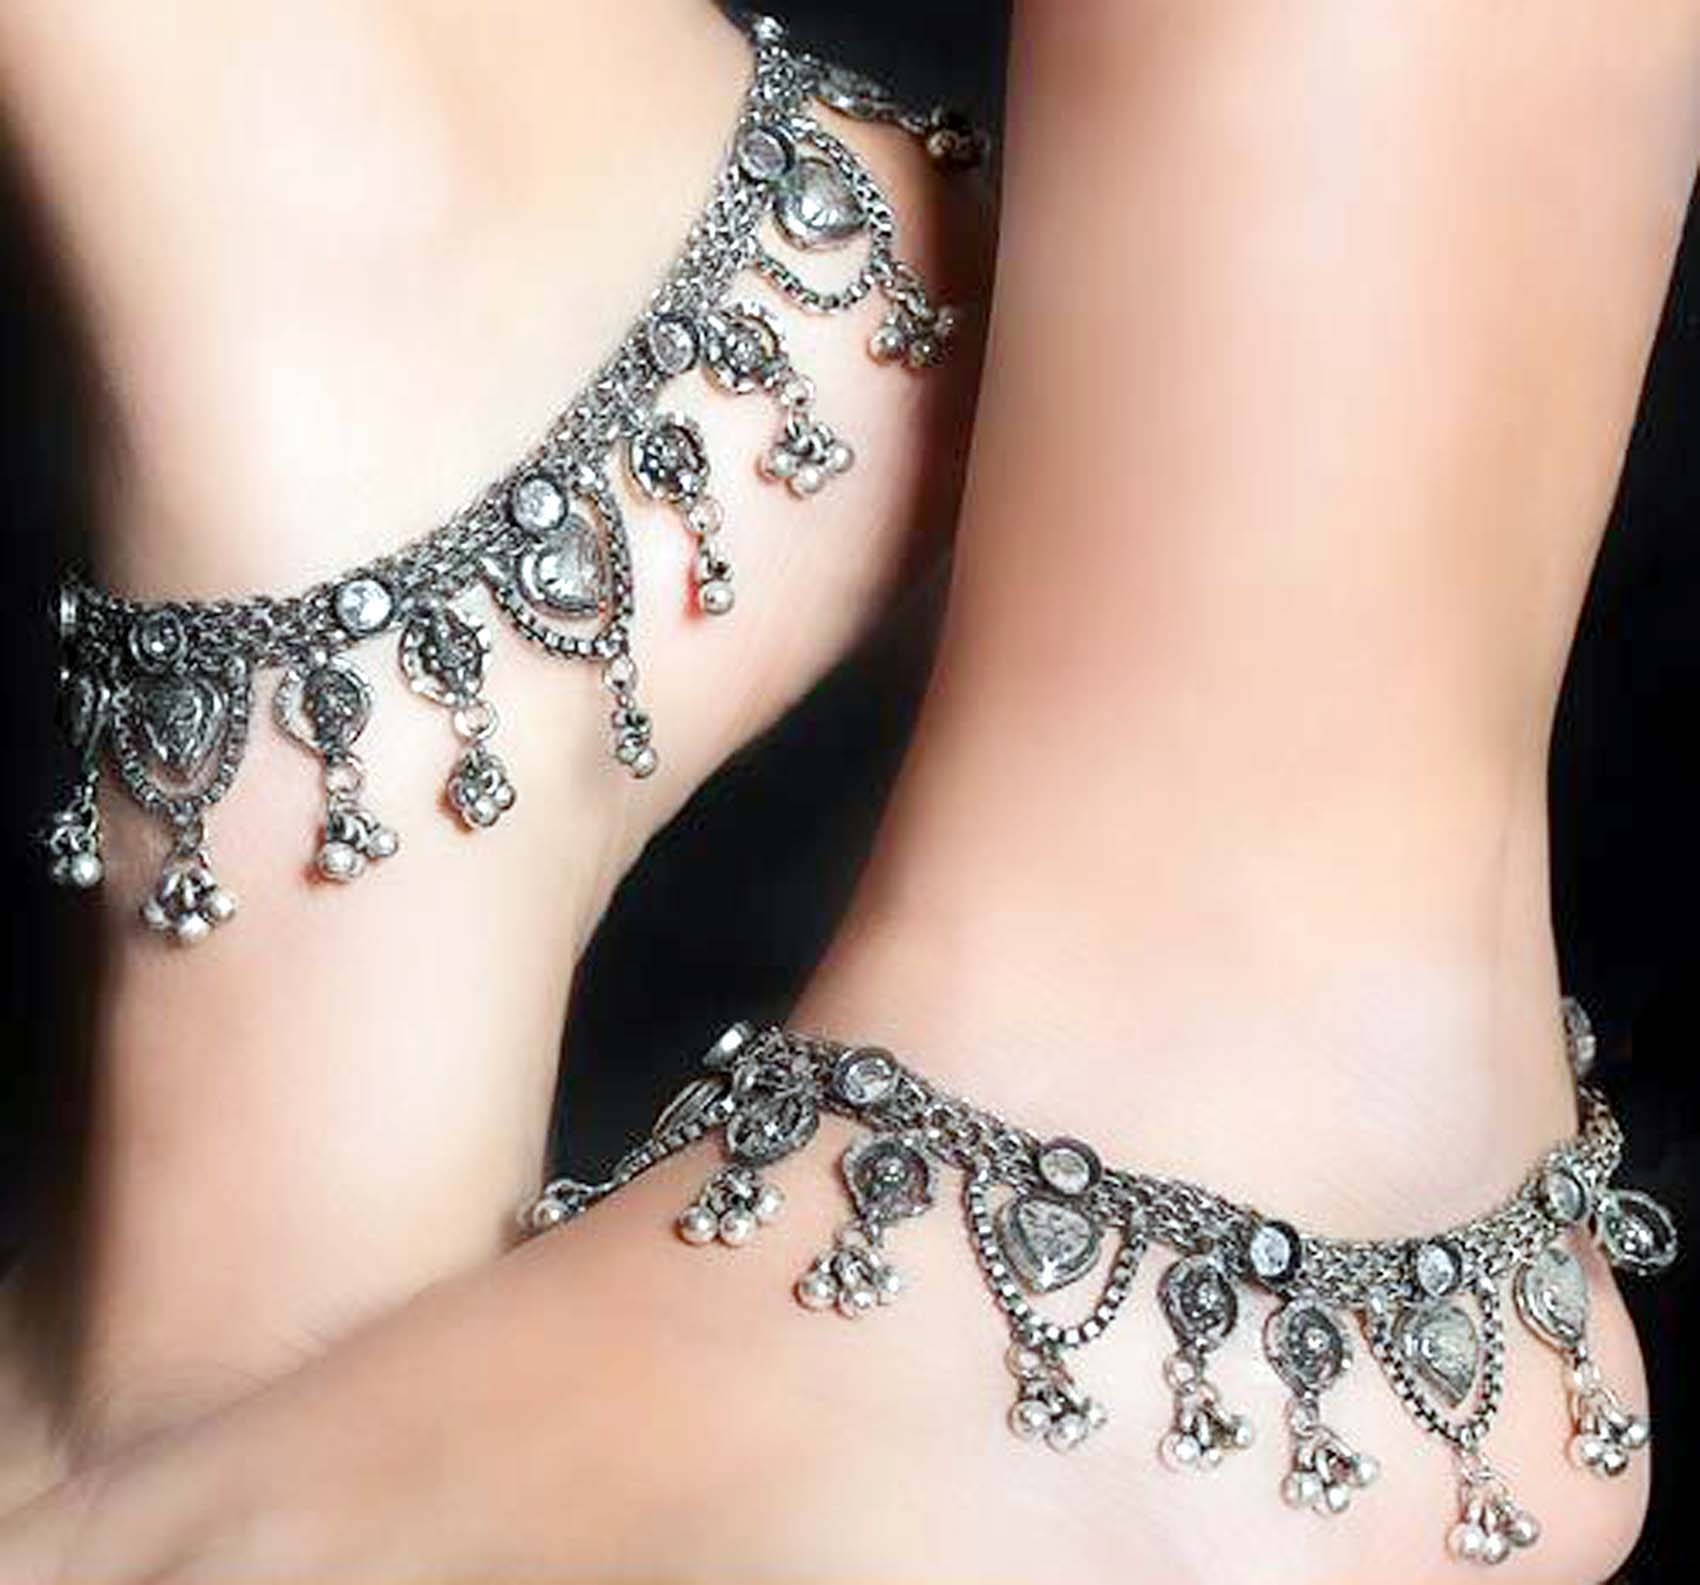 Anklets | The Asian Age Online, Bangladesh